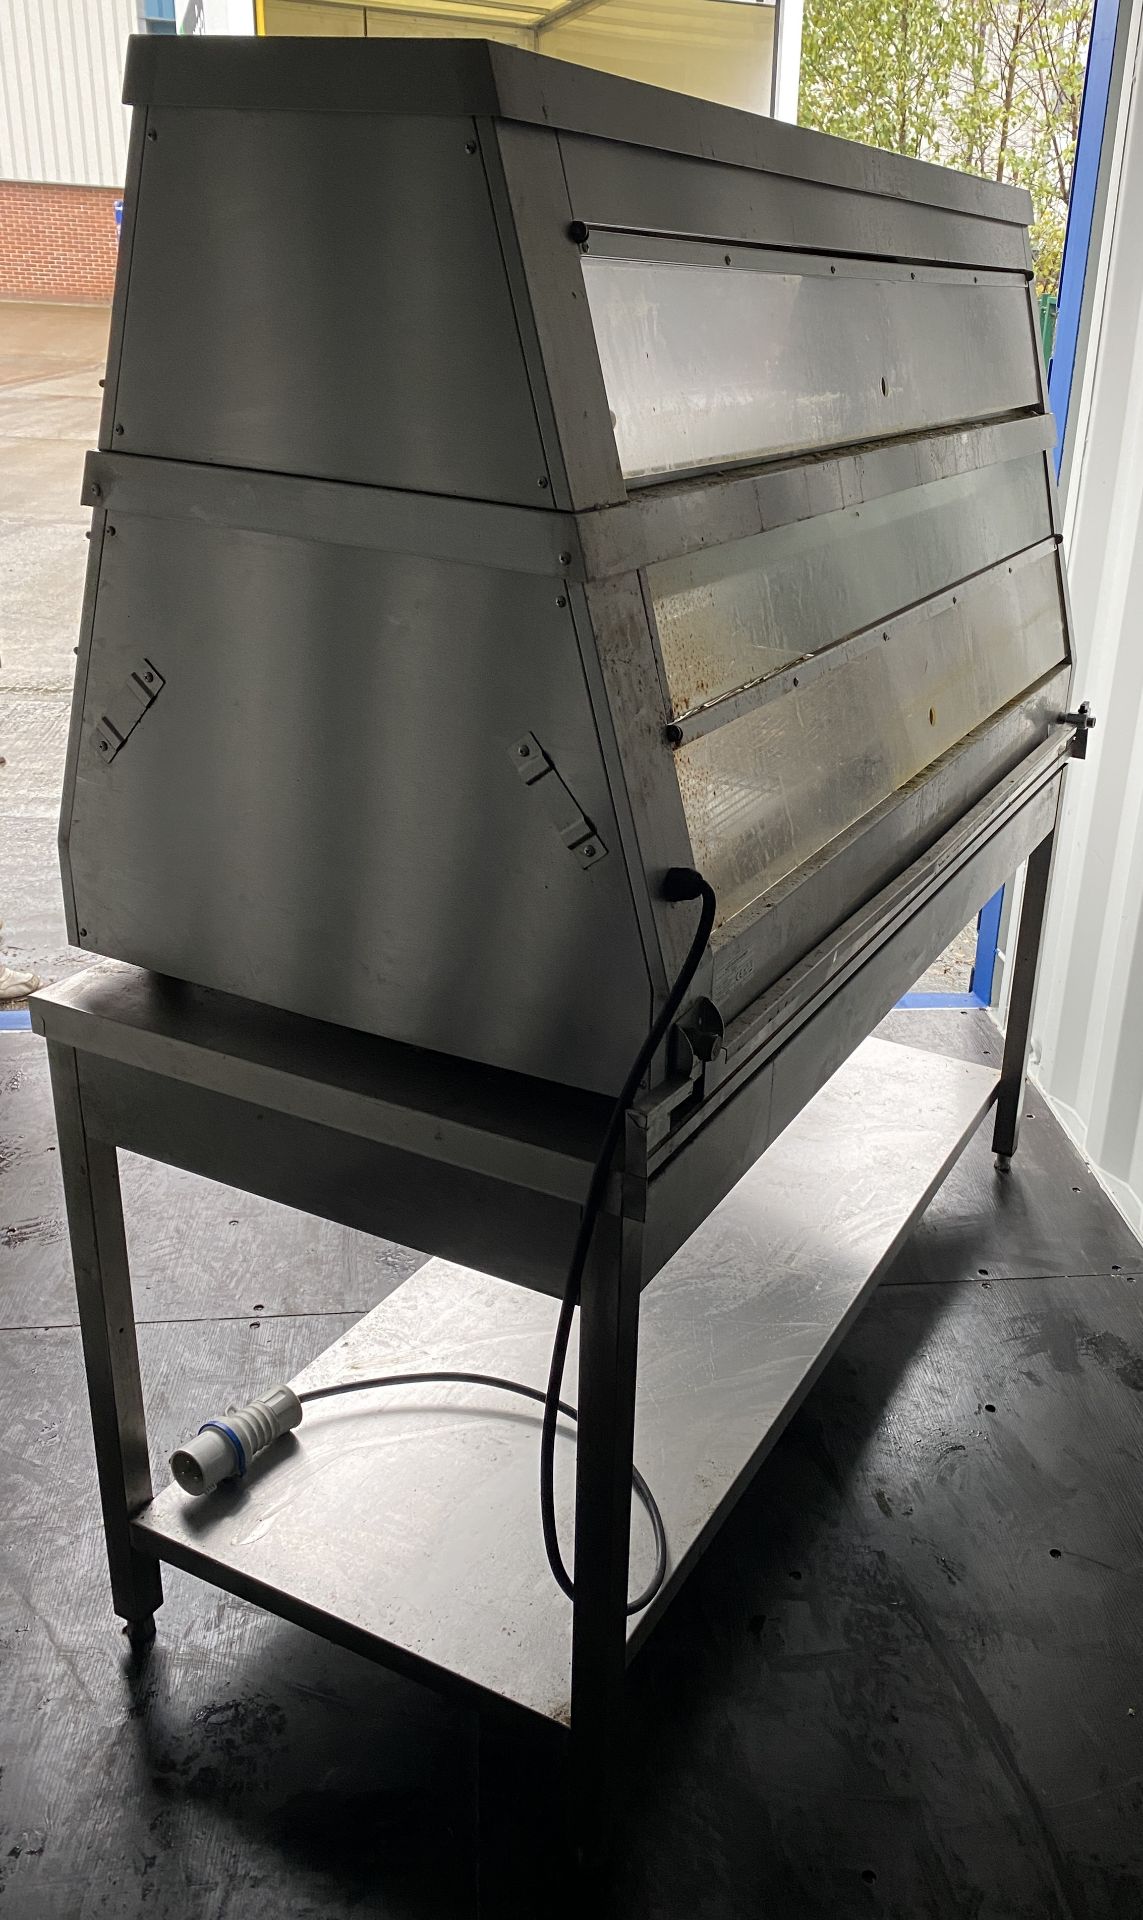 Adexa HDS-Series 2 tier heated counter warmer on stainless steel prep table with undershelf (not - Image 4 of 5